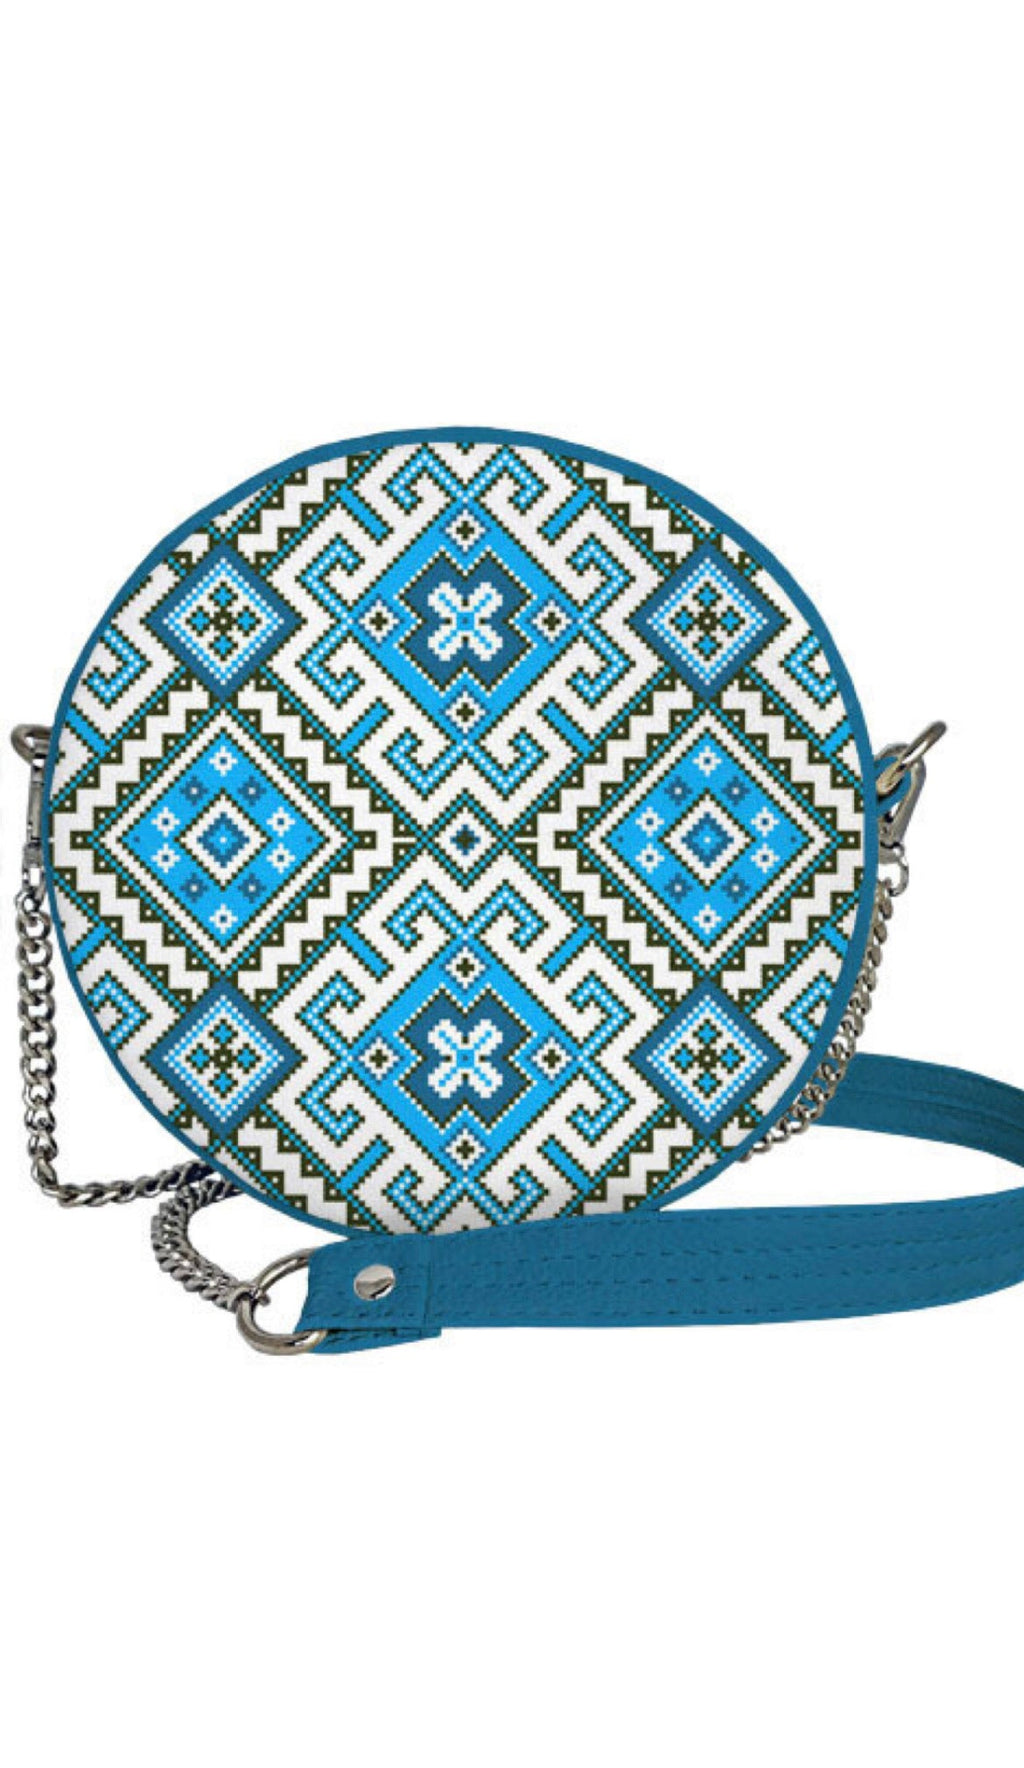 Round Purse “Blue Embroidery”